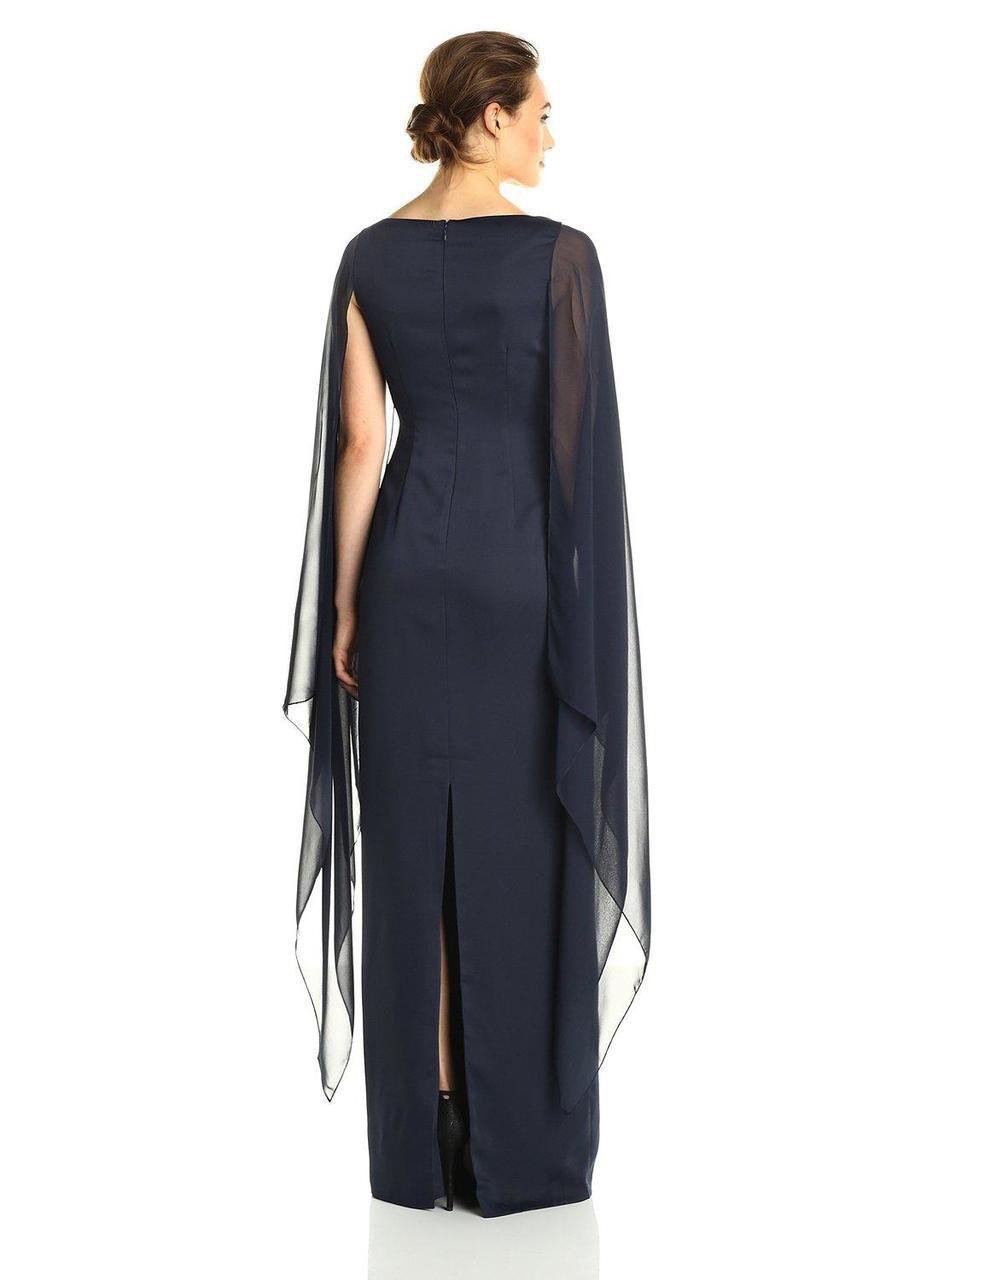 Adrianna Papell - 81917310 Fitted Bateau Dress with Cape in Black